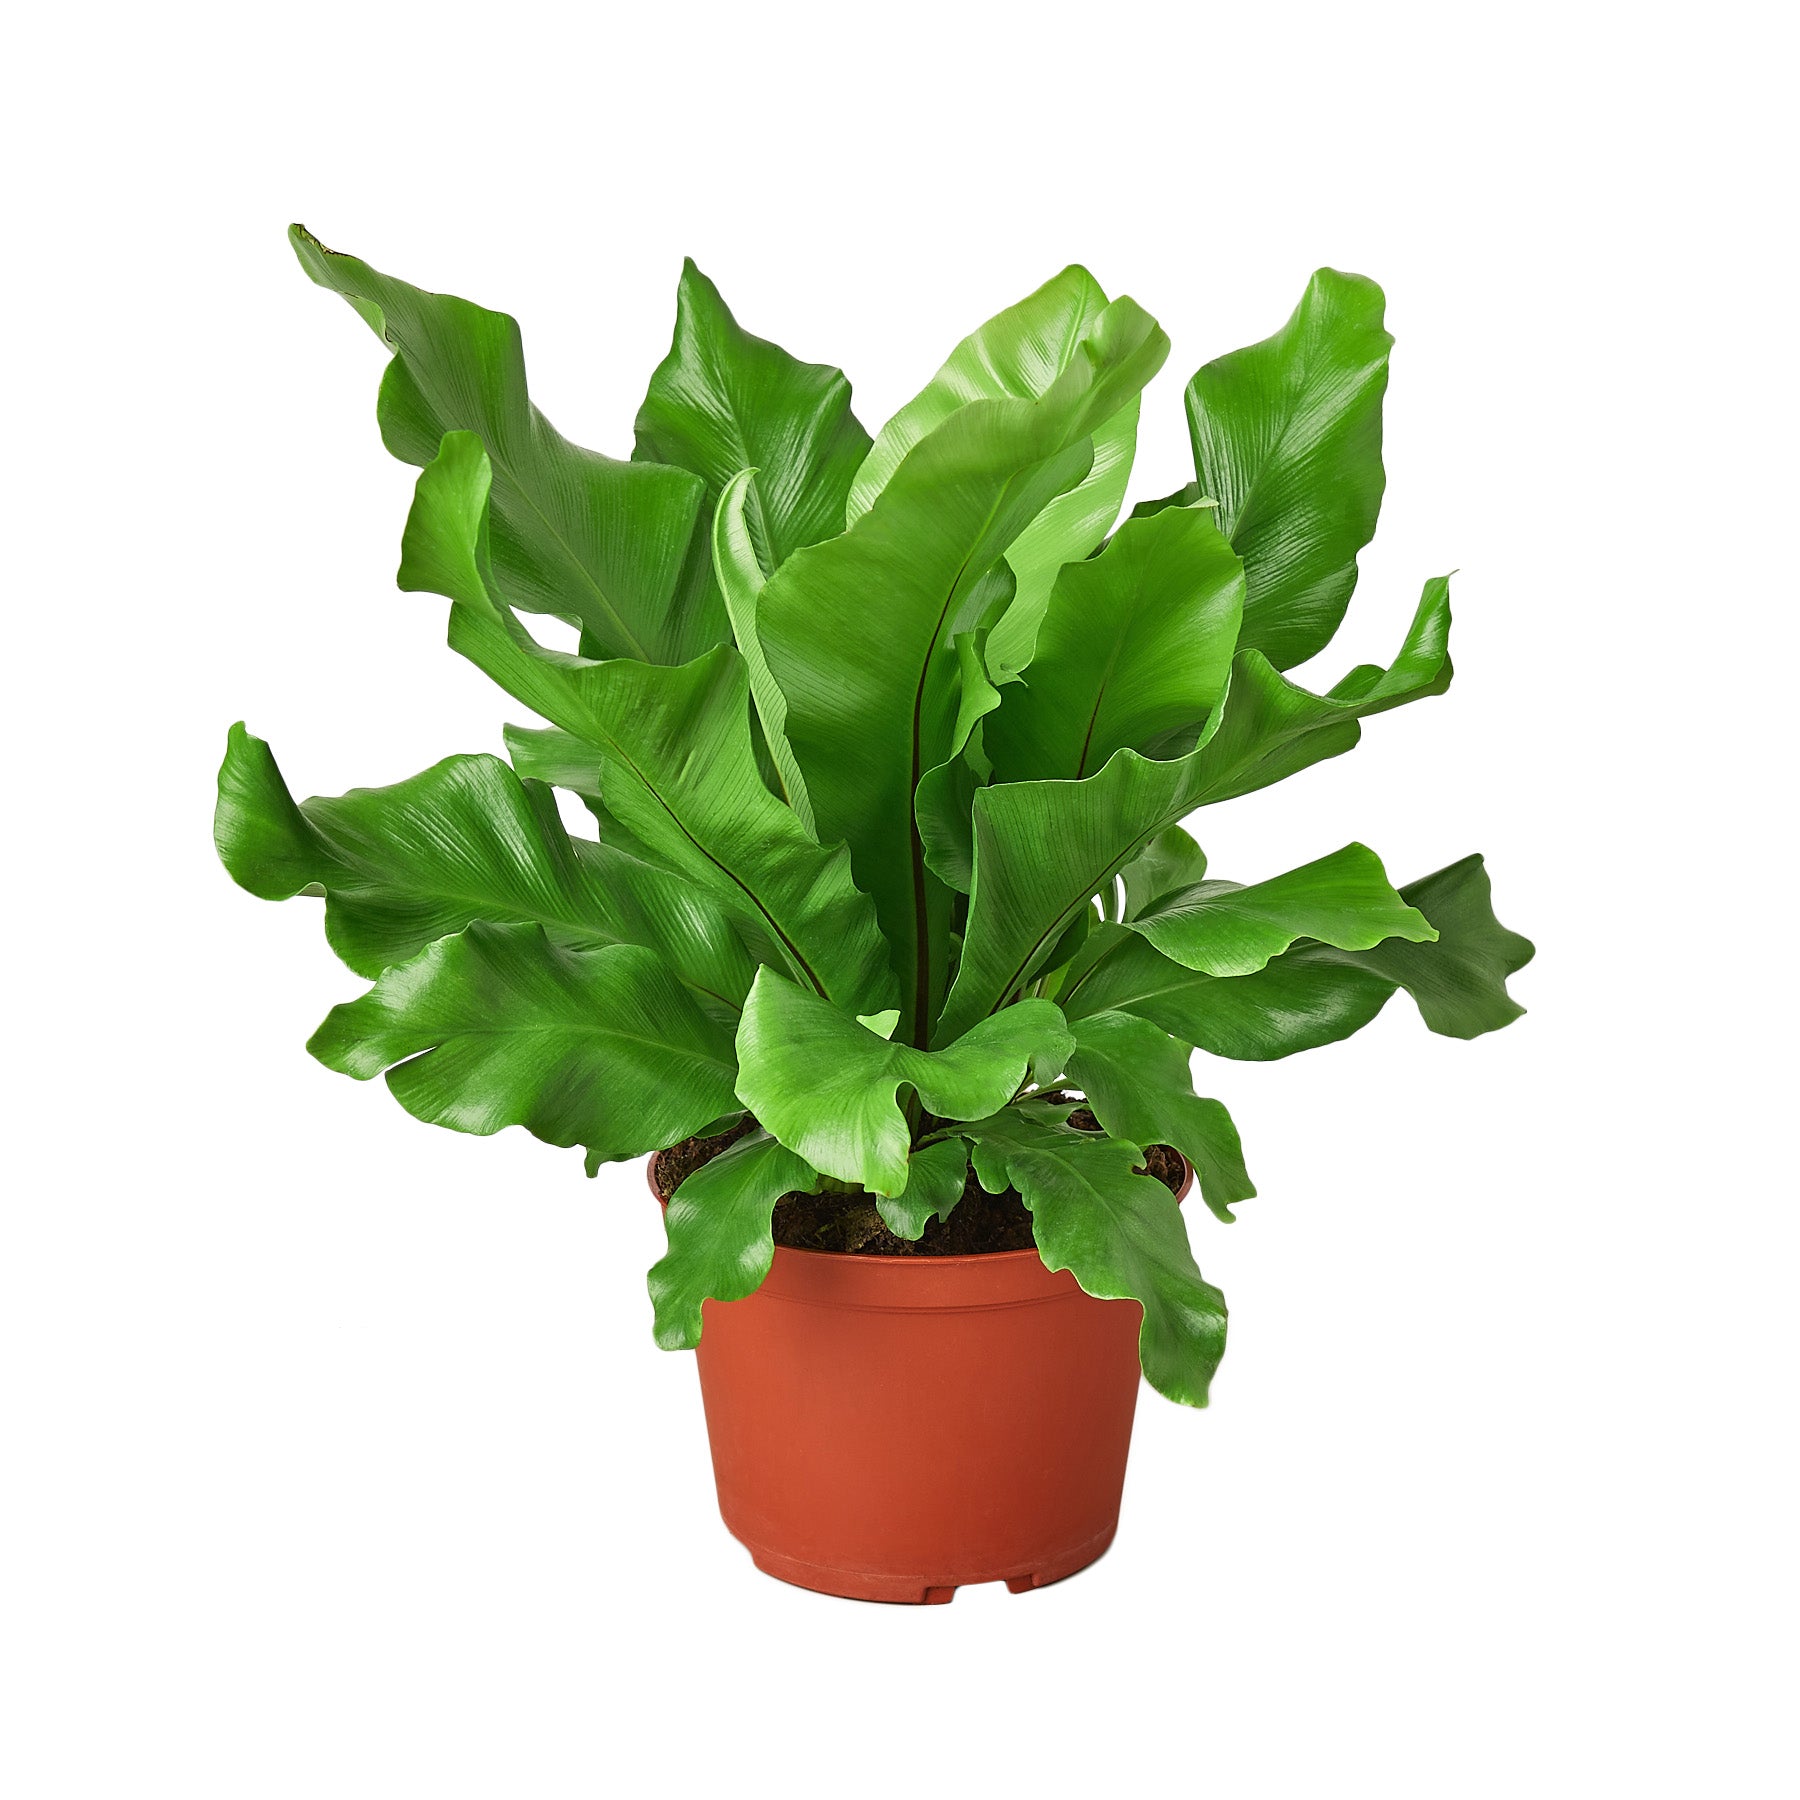 A vibrant fern plant in a pot, set against a clean white background.